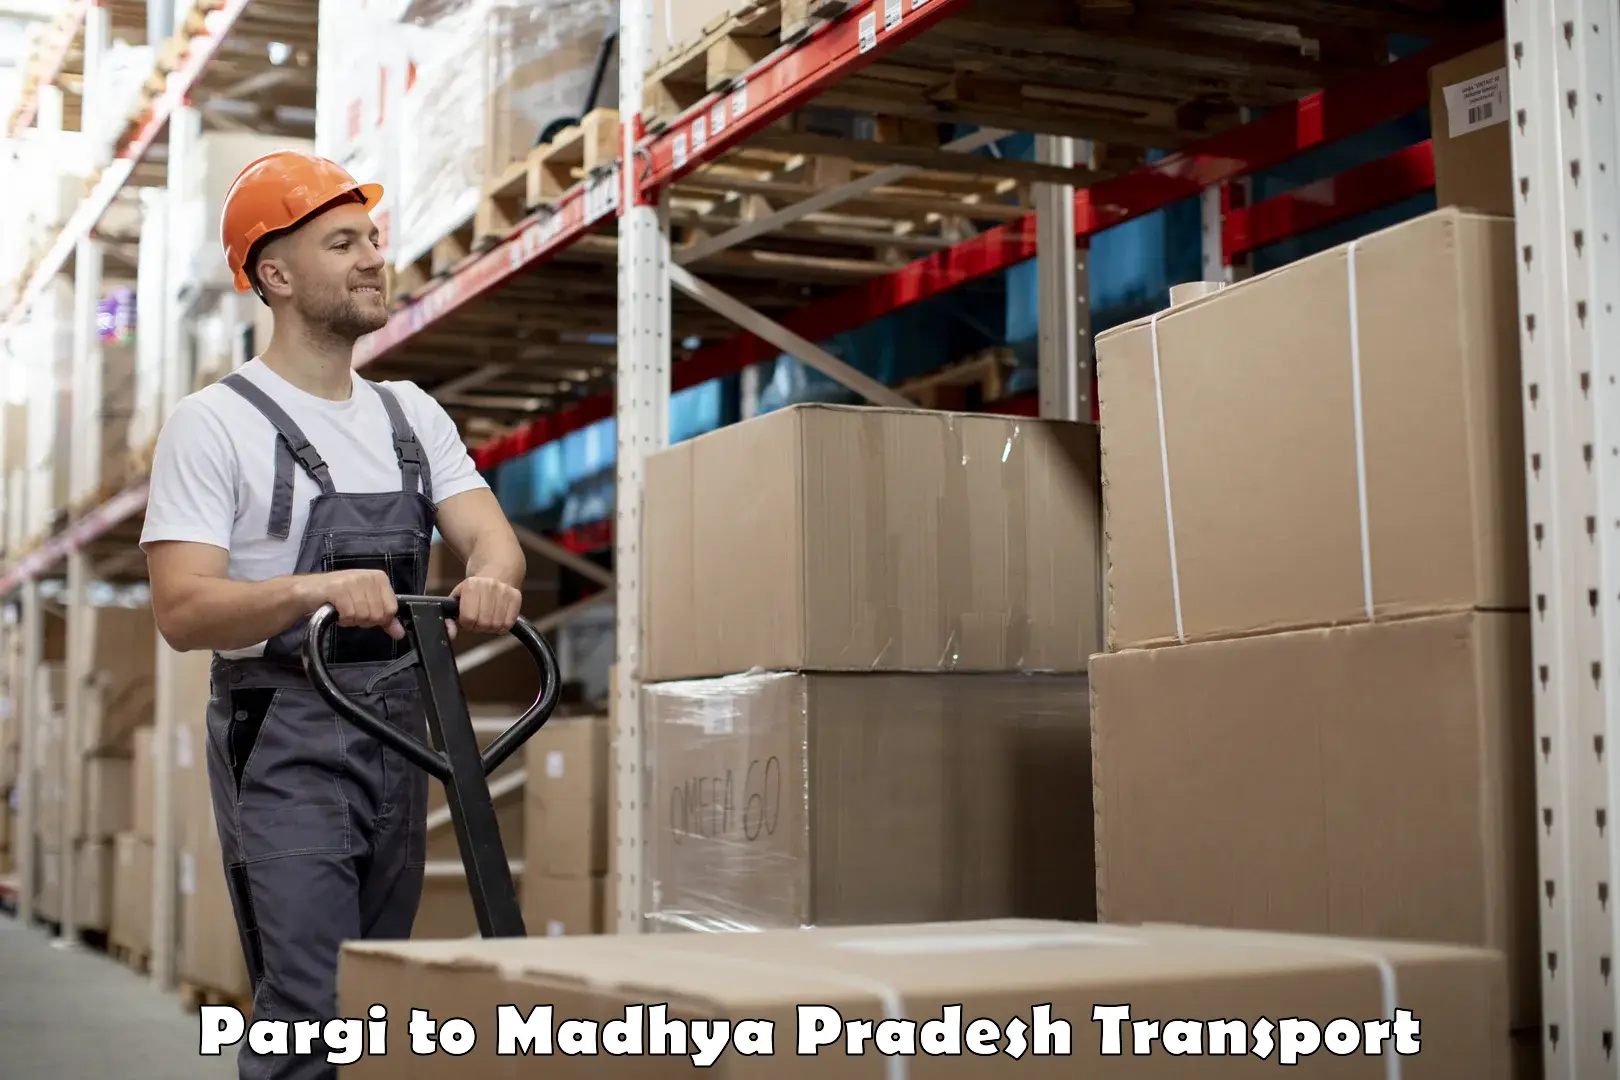 Goods delivery service Pargi to Gotegaon